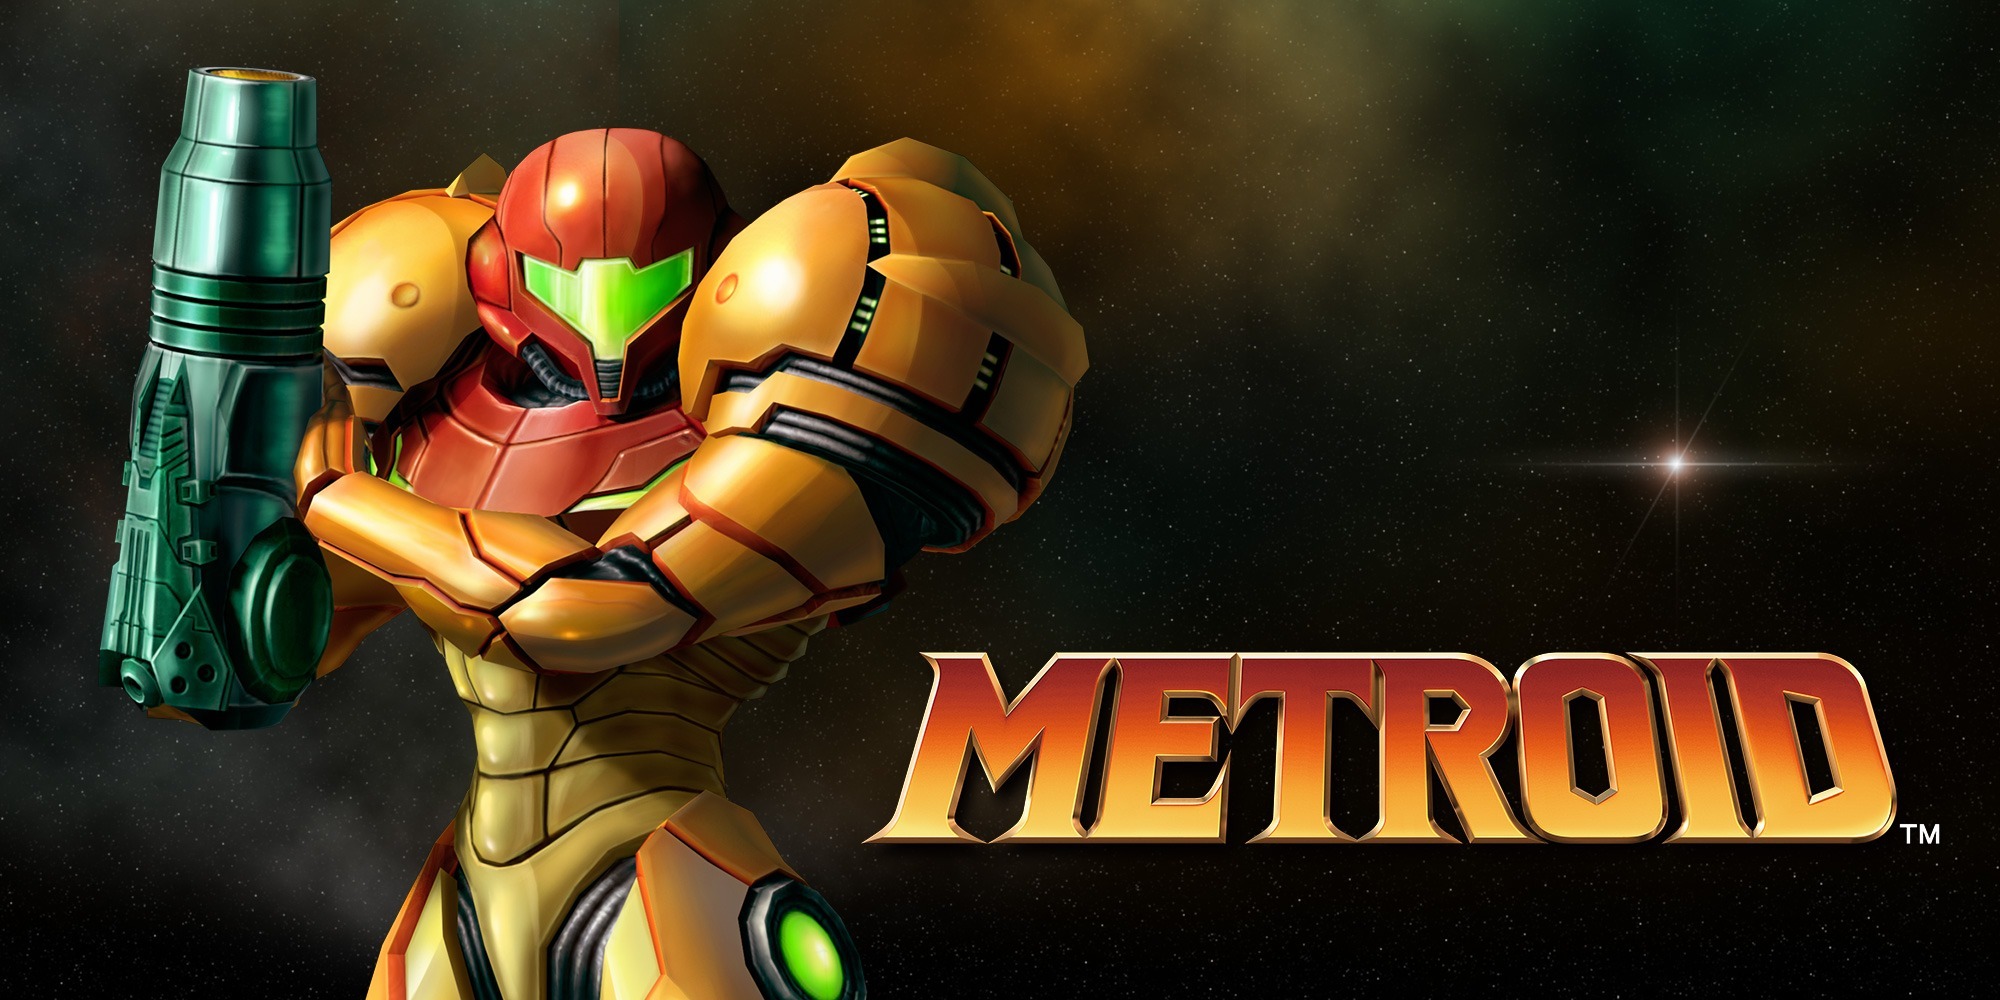 Metroid: The Legendary Series that Shaped Video Games for 30 Years